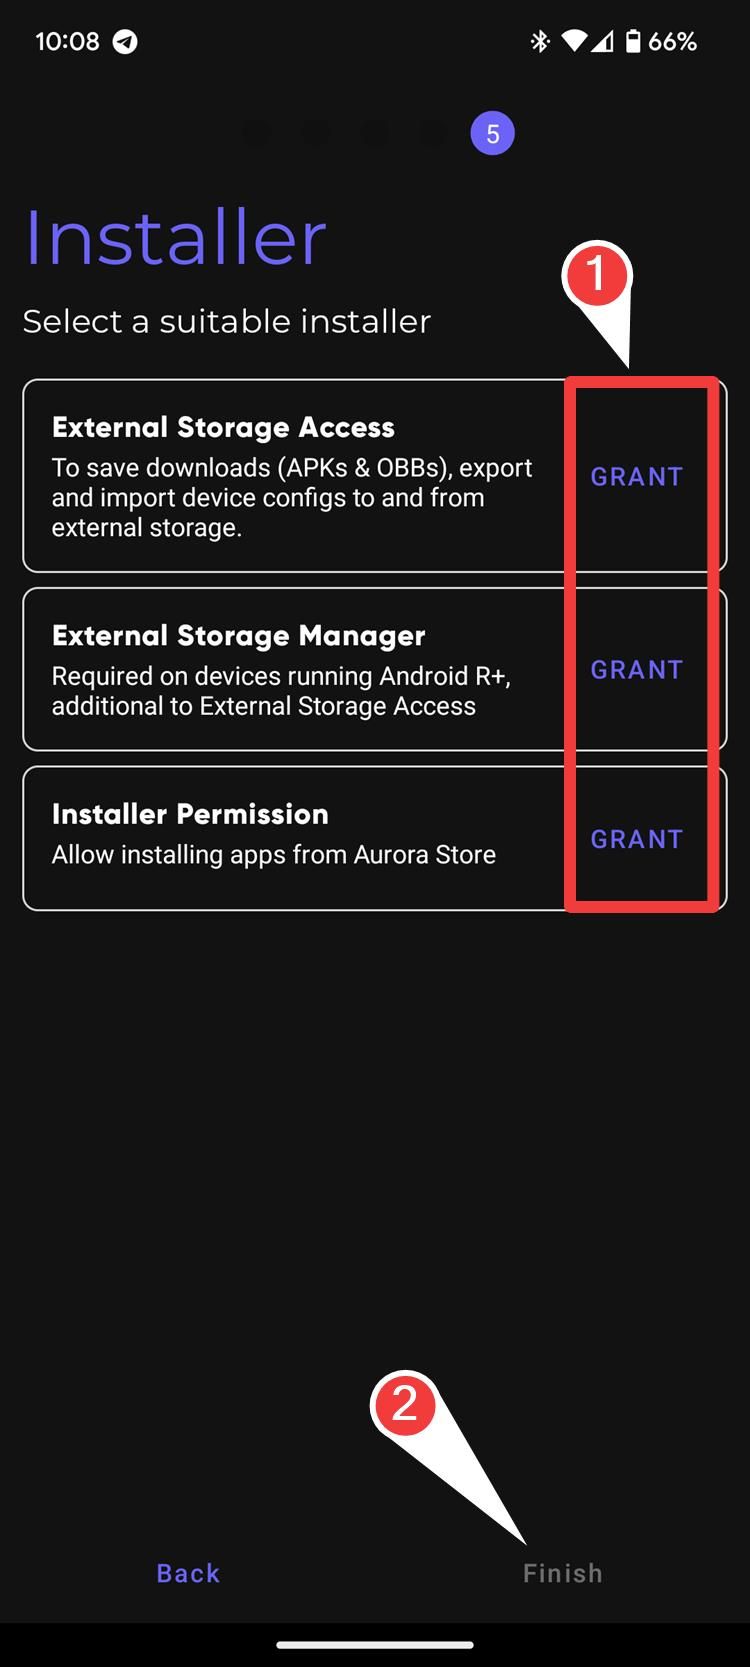 The Installer page in the Aurora Store app with a red box around the Grant buttons to give the app the permissions it needs